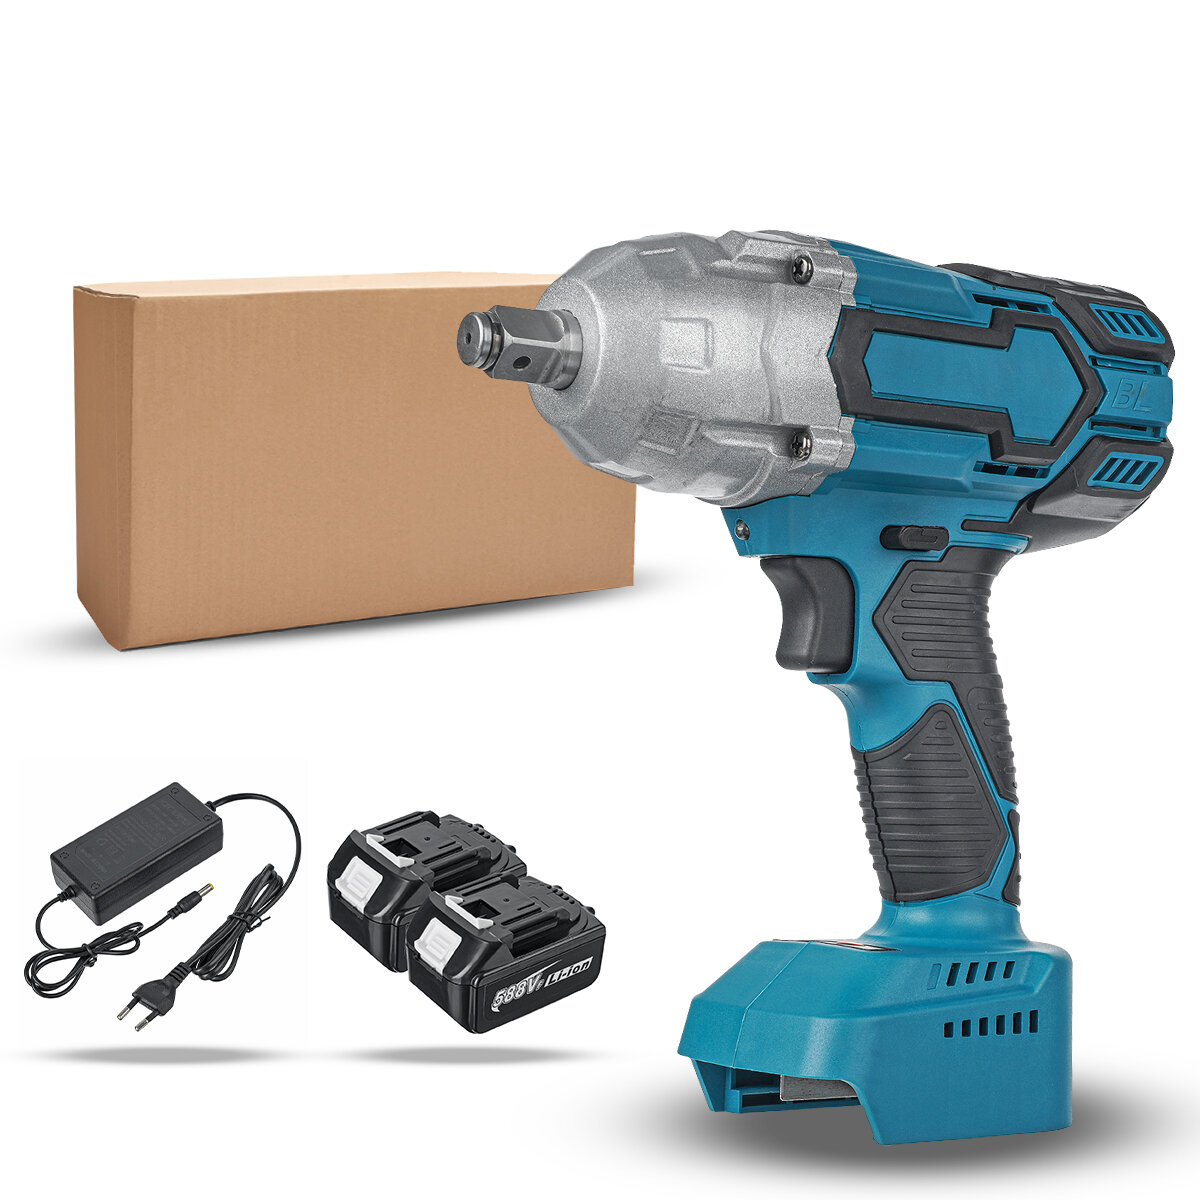 588VF 880N.m 3/4" Cordless Brushless Electric Impact Wrench Rechargeable Woodworking Maintenance Too